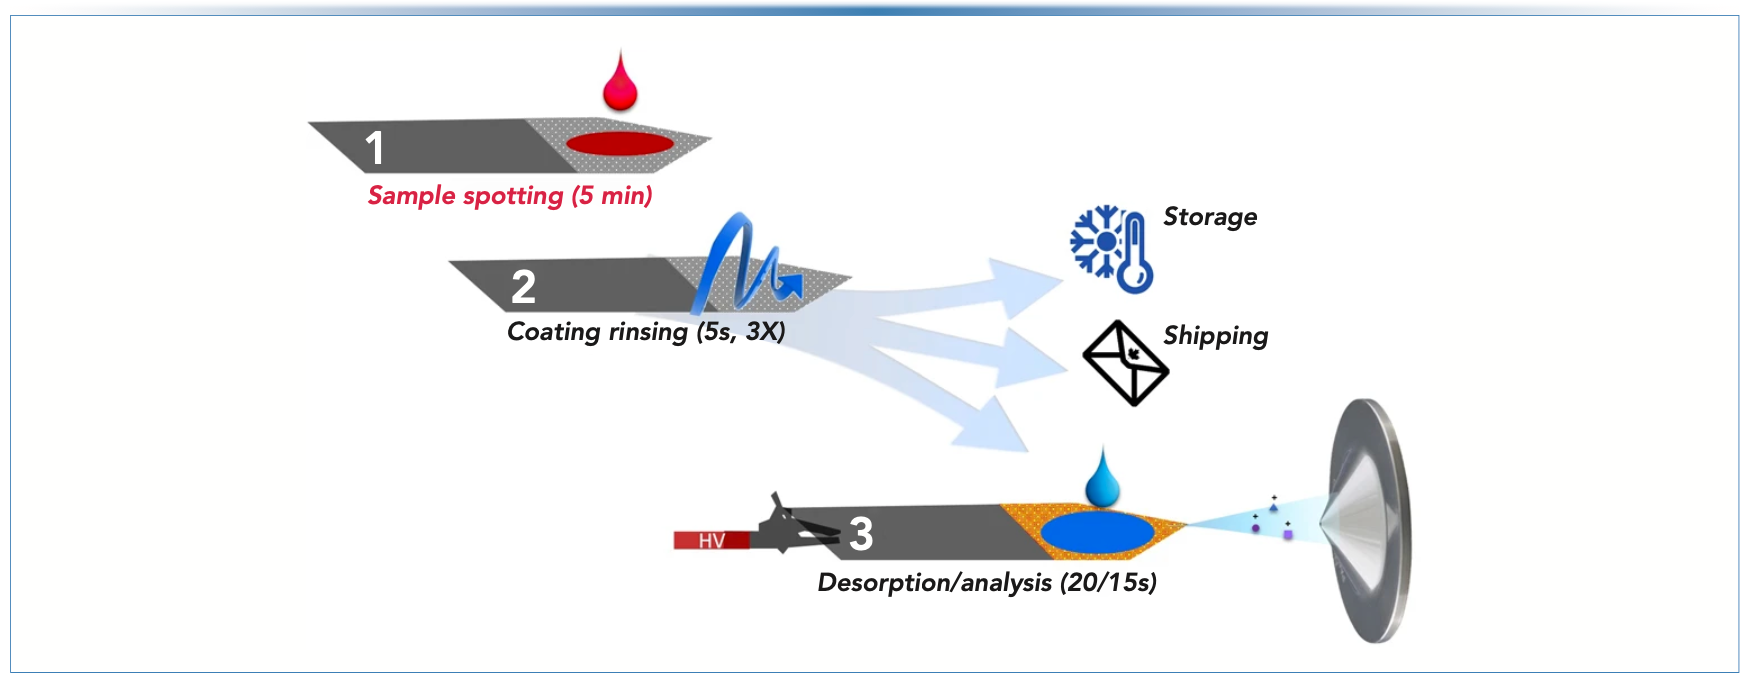 FIGURE 2: Experimental schematic of coated blade spray mass spectrometry for the rapid analysis of controlled substances in biofluids. Reproduced with permission from Gómez-Ríos and others (26).